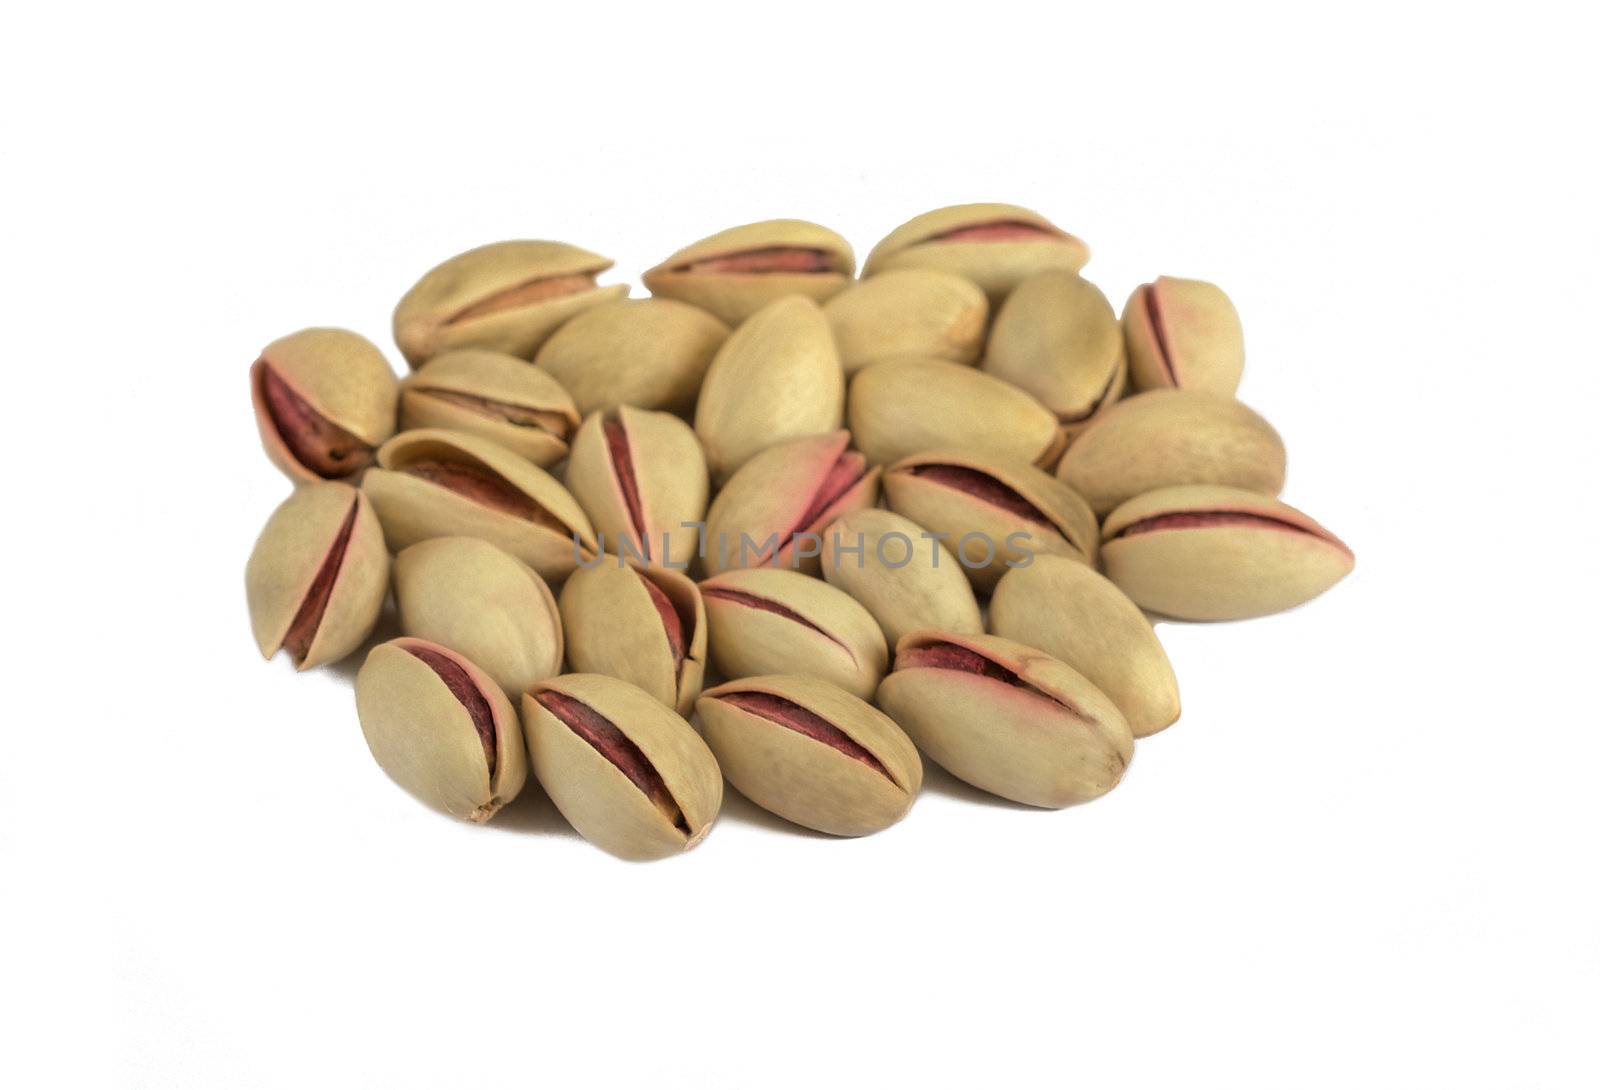 Some pistachios isolated over a white background.